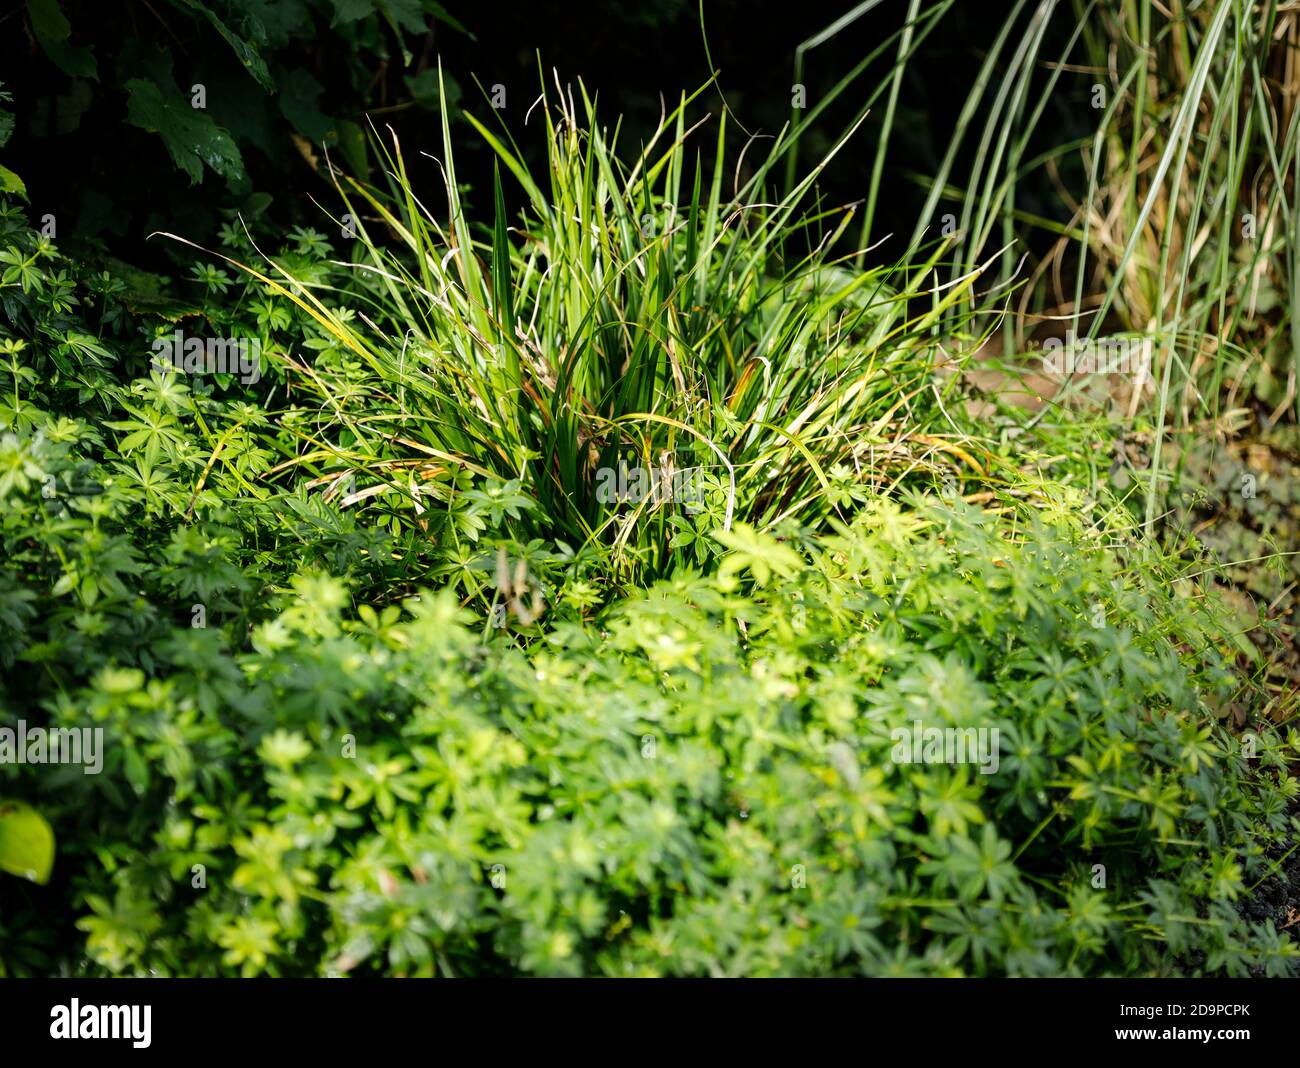 Woodruff and sedge in the bed Stock Photo